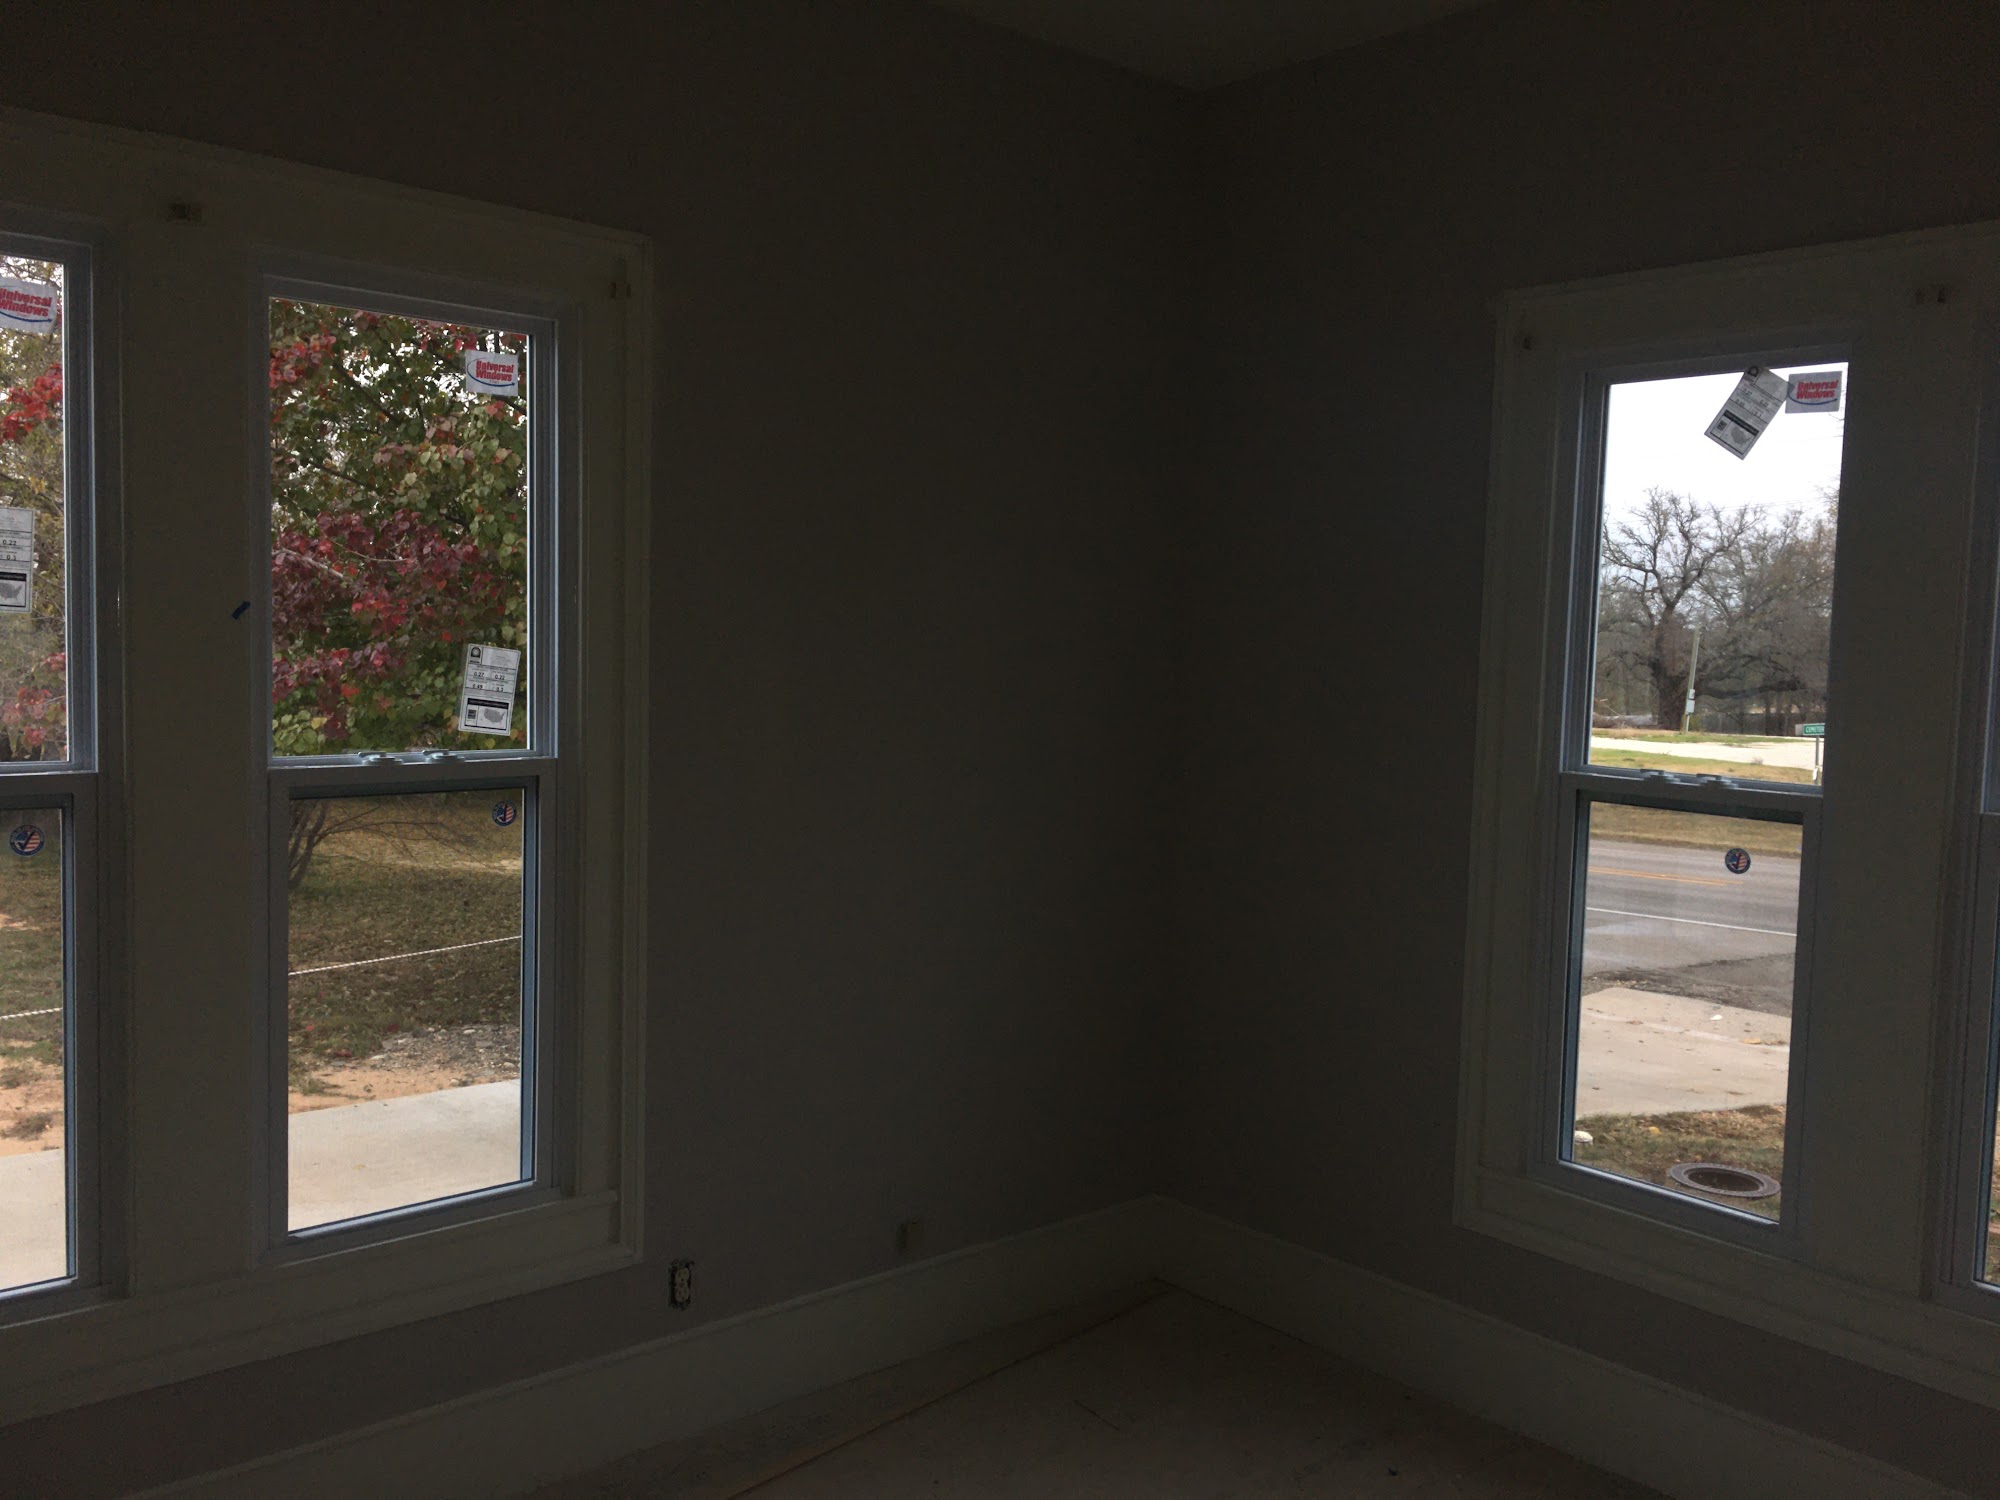 Universal Windows Direct of Central Texas 7721 Central Park Dr Unit B, Woodway Texas 76712